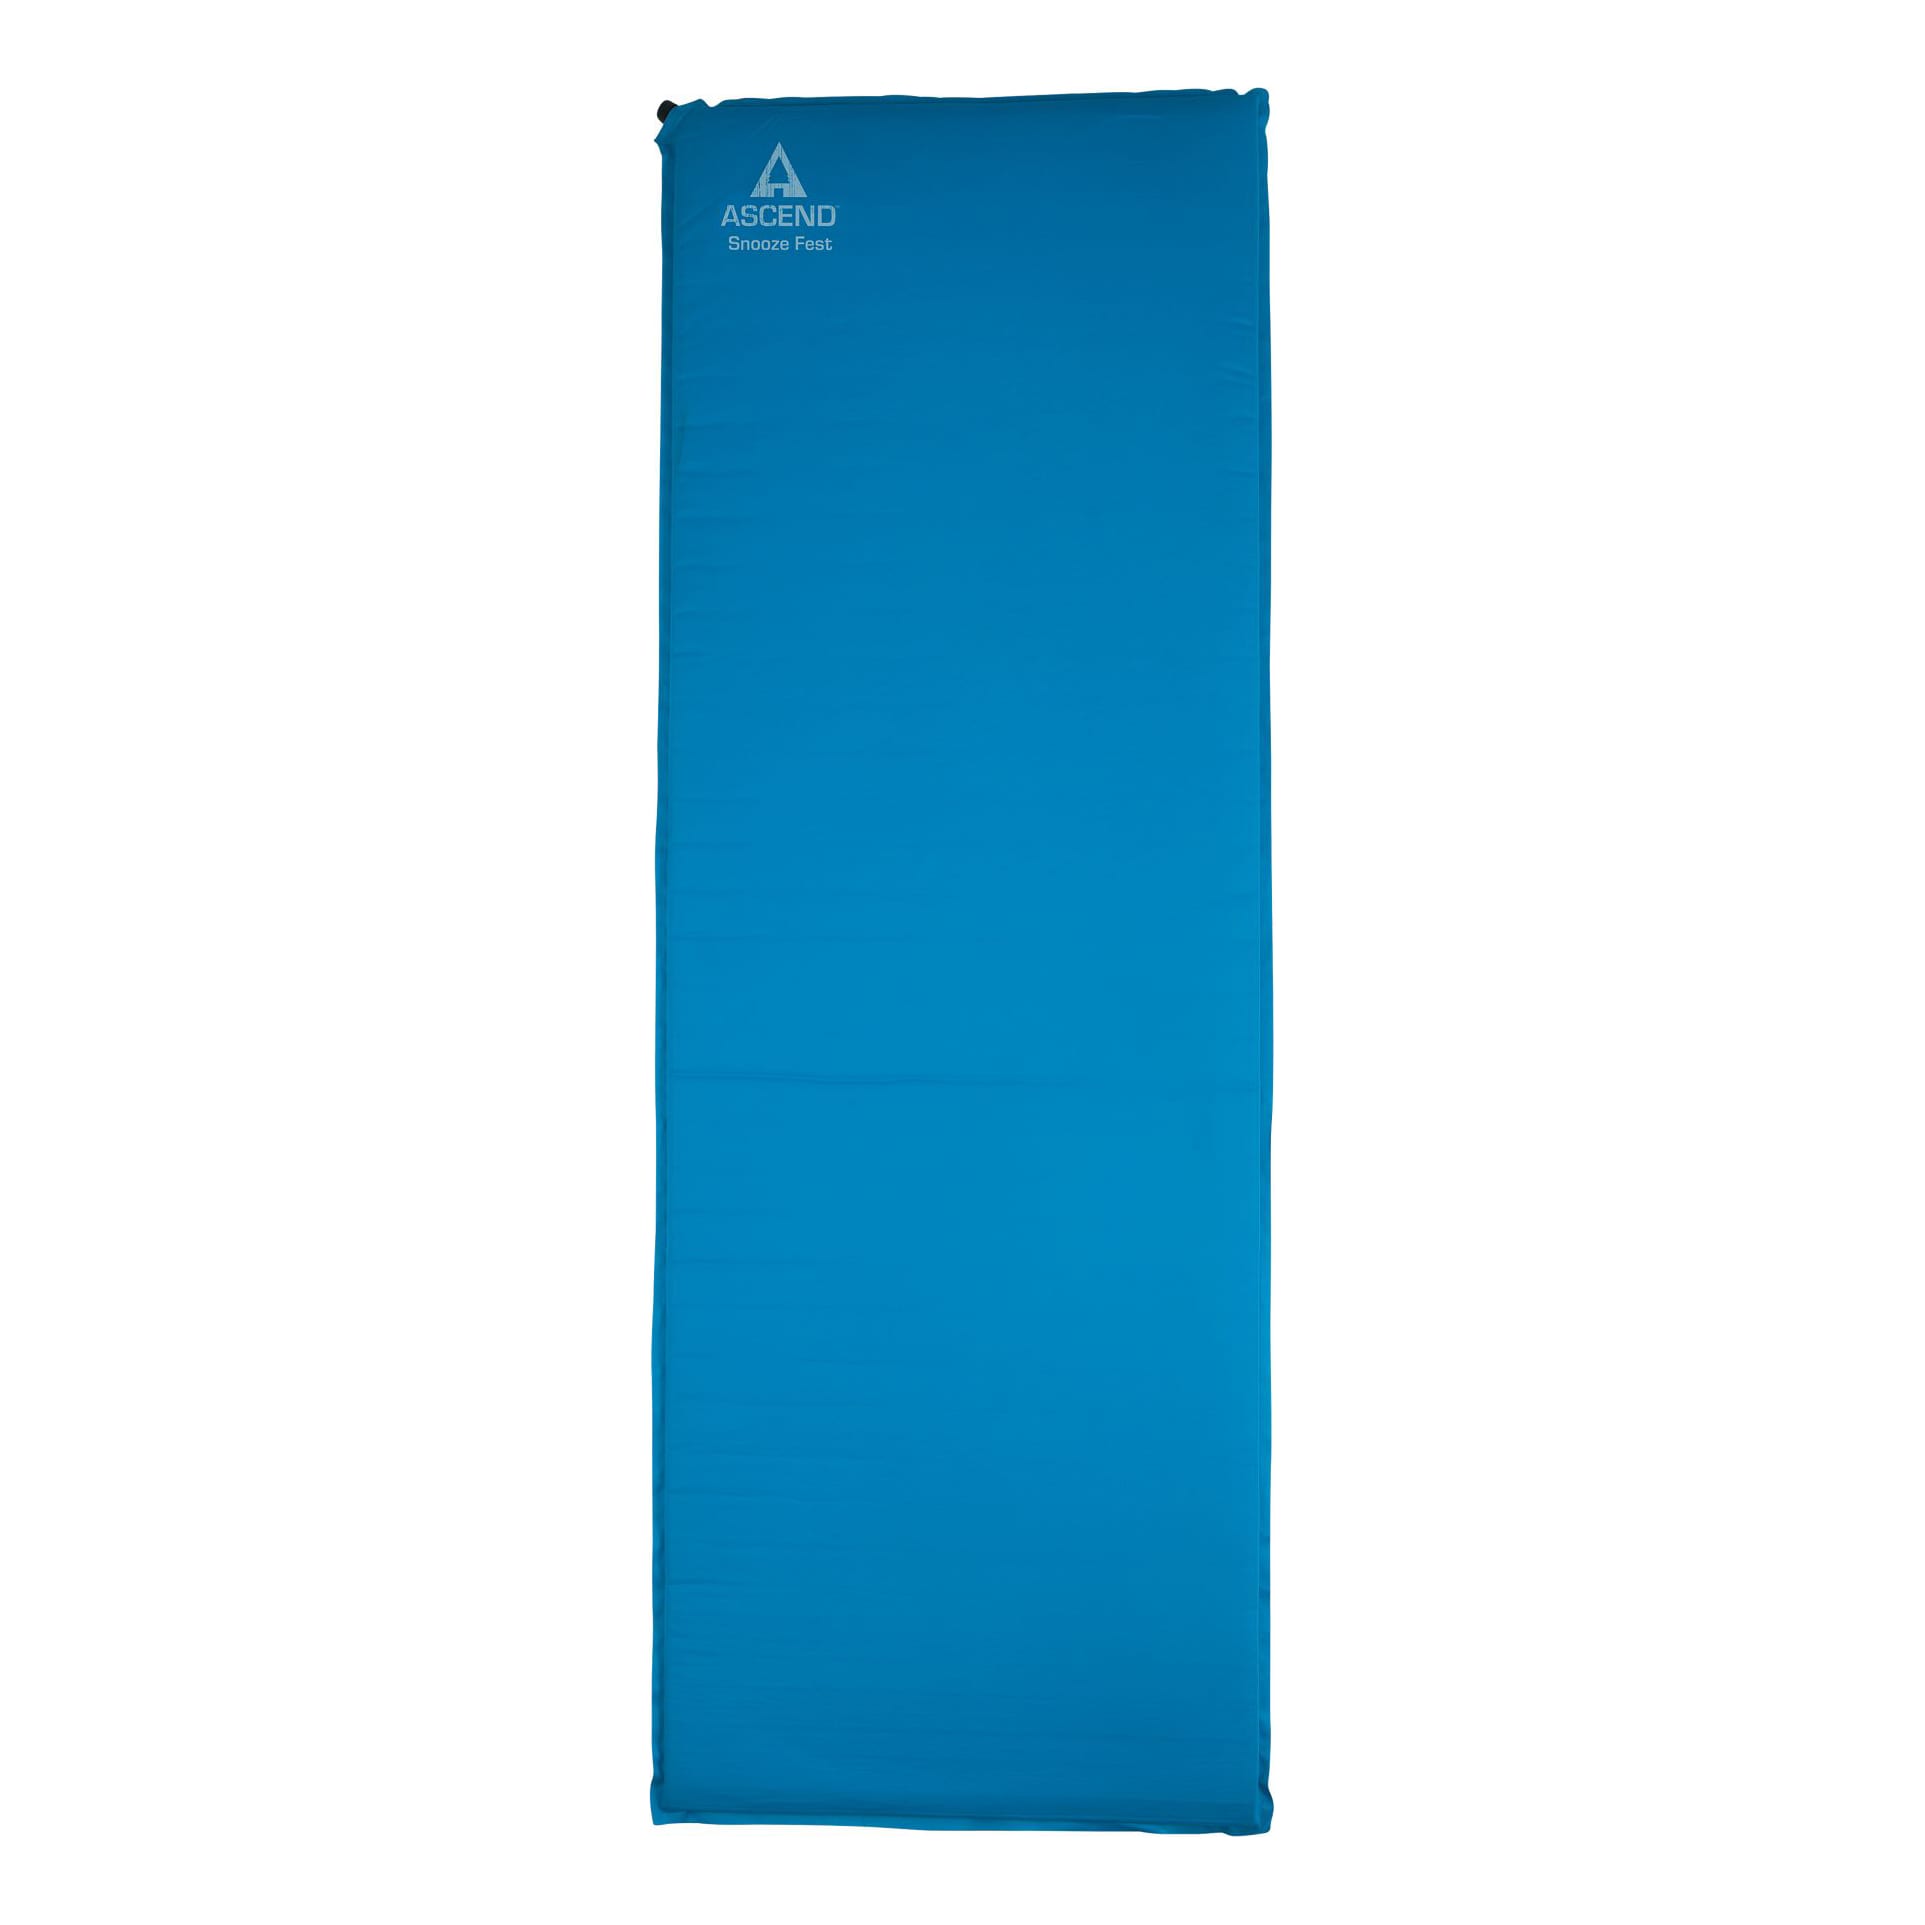 Ascend Snooze Fest Self-Inflating Sleeping Pad